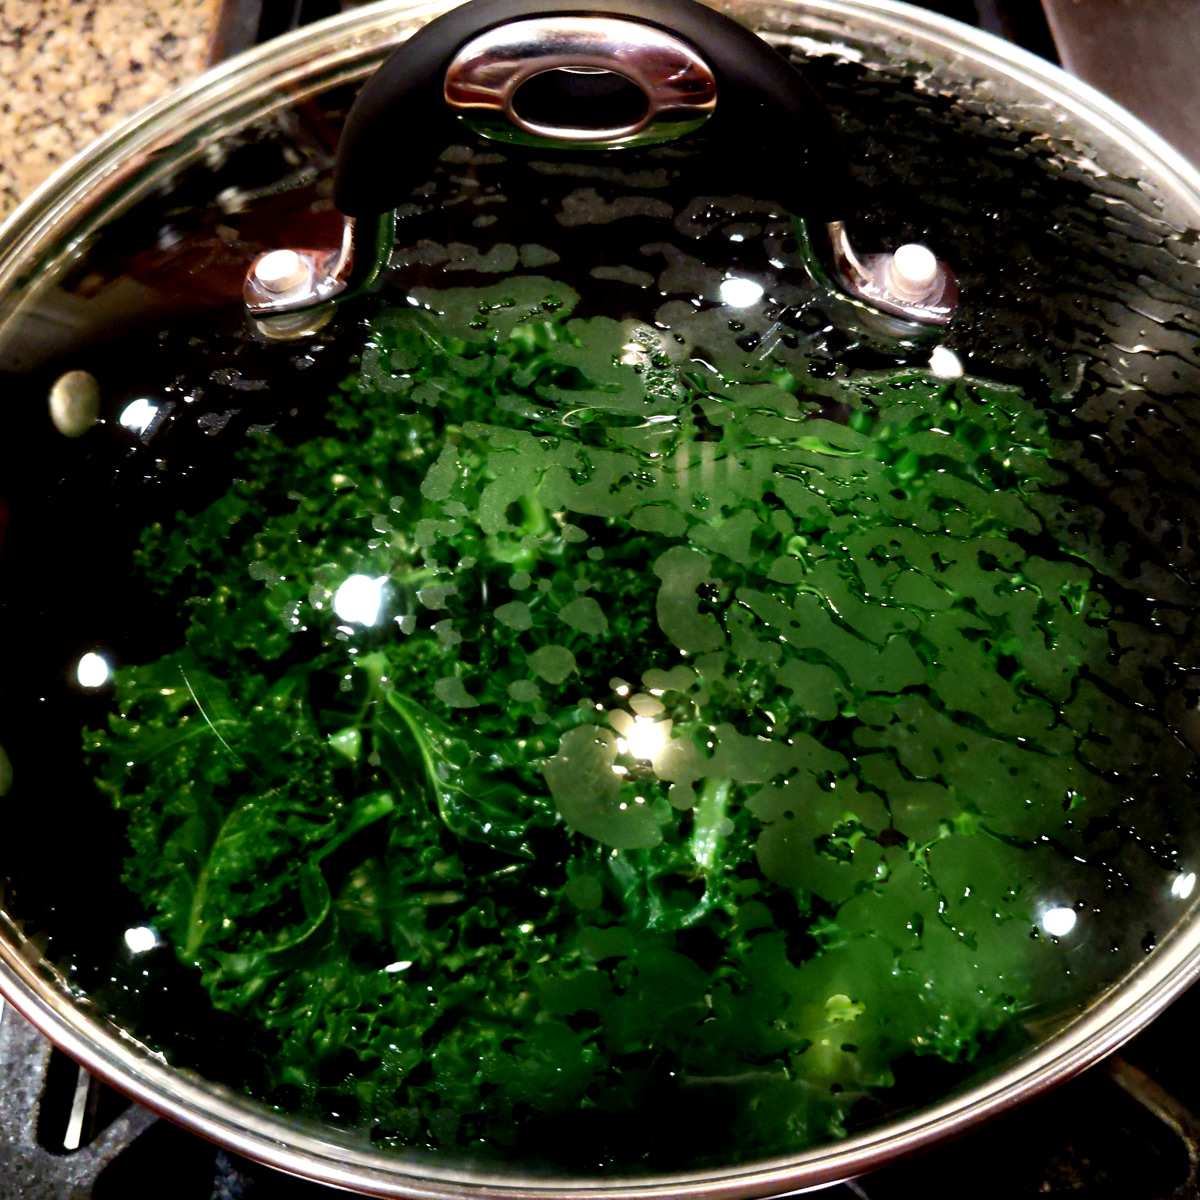 Cover the kale with a lid while cooking